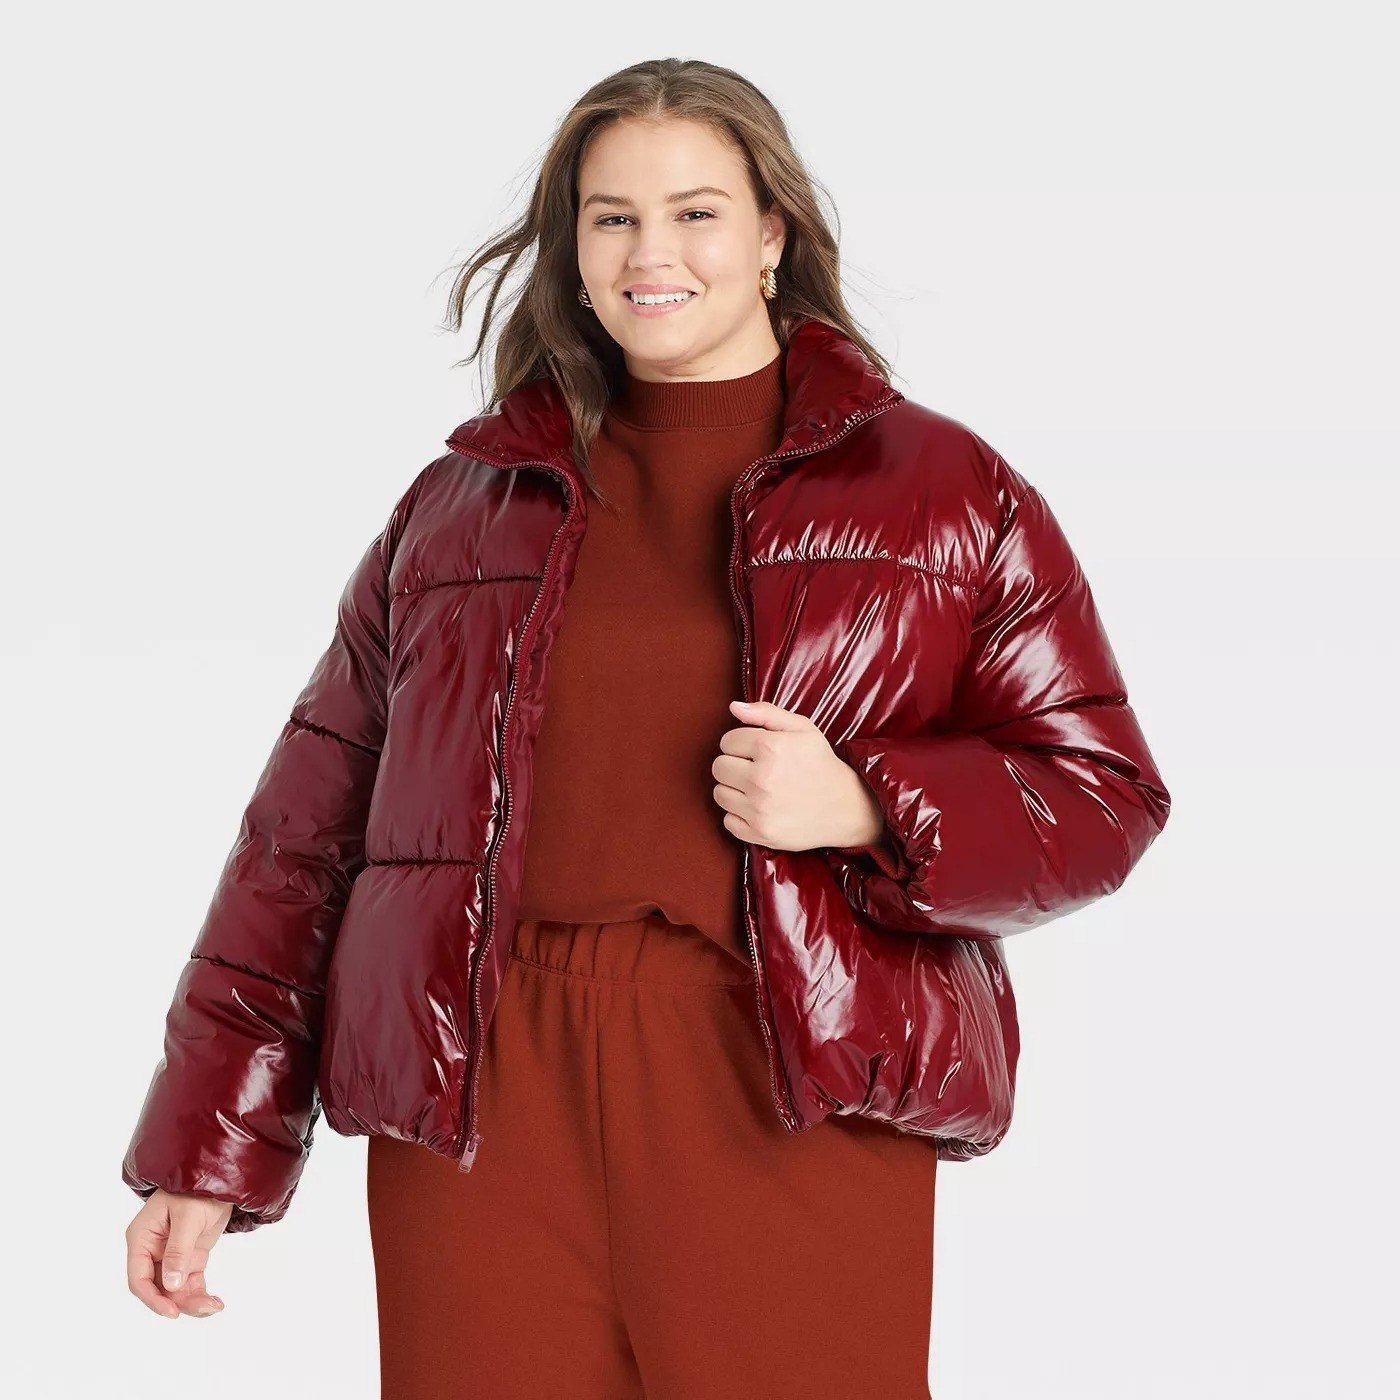 Model wearing red puffy jacket, goes past the waist